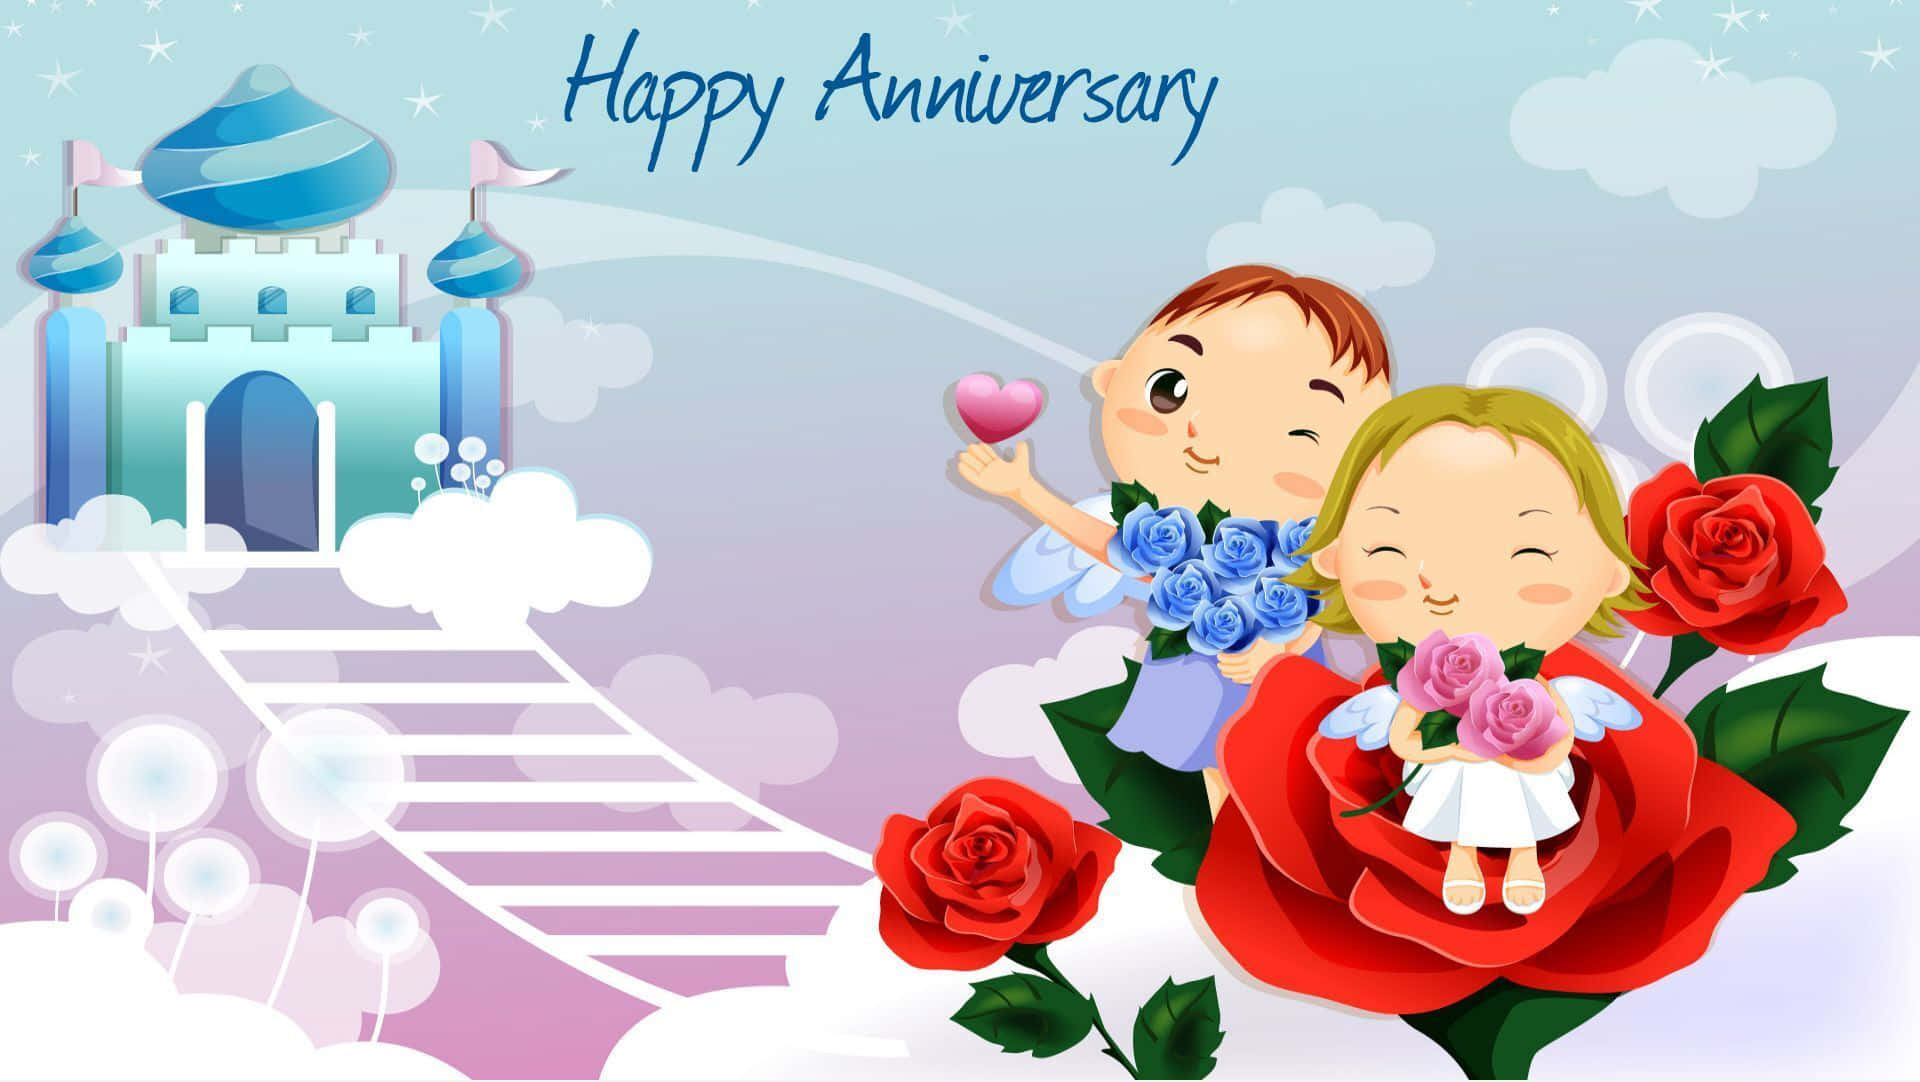 Happy Anniversary Images For Couples